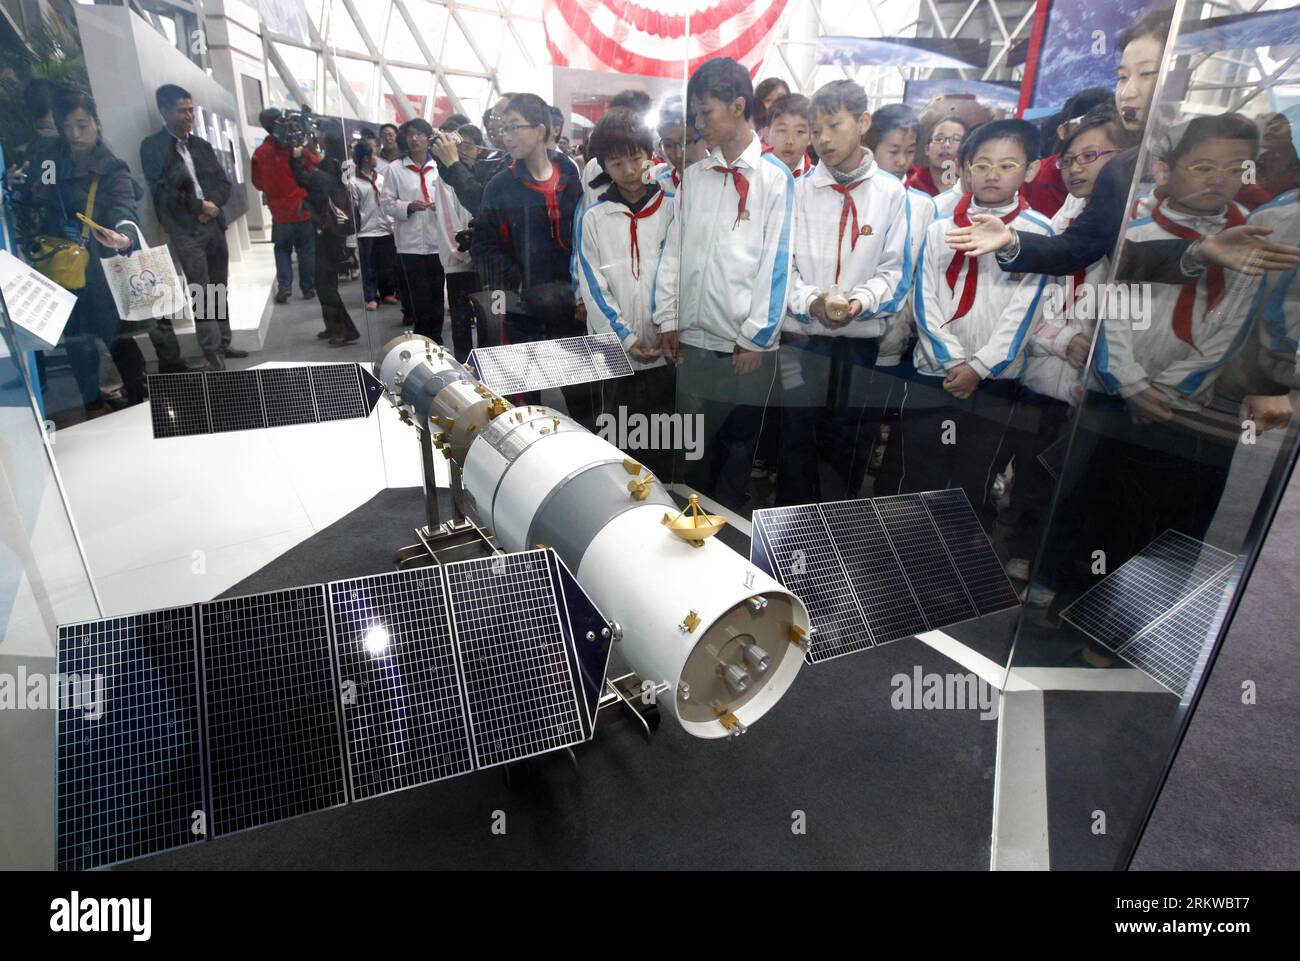 Bildnummer: 58660538  Datum: 02.11.2012  Copyright: imago/Xinhua (121102) -- SHANGHAI, Nov. 2, 2012 (Xinhua) -- Young students look at the model of the Shenzhou-9 manned spacecraft docking with the orbiting Tiangong-1 space lab module during the Exhibition on China s First Manned Space Docking Mission in Shanghai, east China, Nov. 2, 2012. The exhibition kicked off Friday at the Shanghai Science and Technology Museum. Three astronauts aboard Shenzhou-9 spacecraft were sent into space on June 16. They successfully operated the spacecraft to conduct both automatic and manual space dockings with Stock Photo